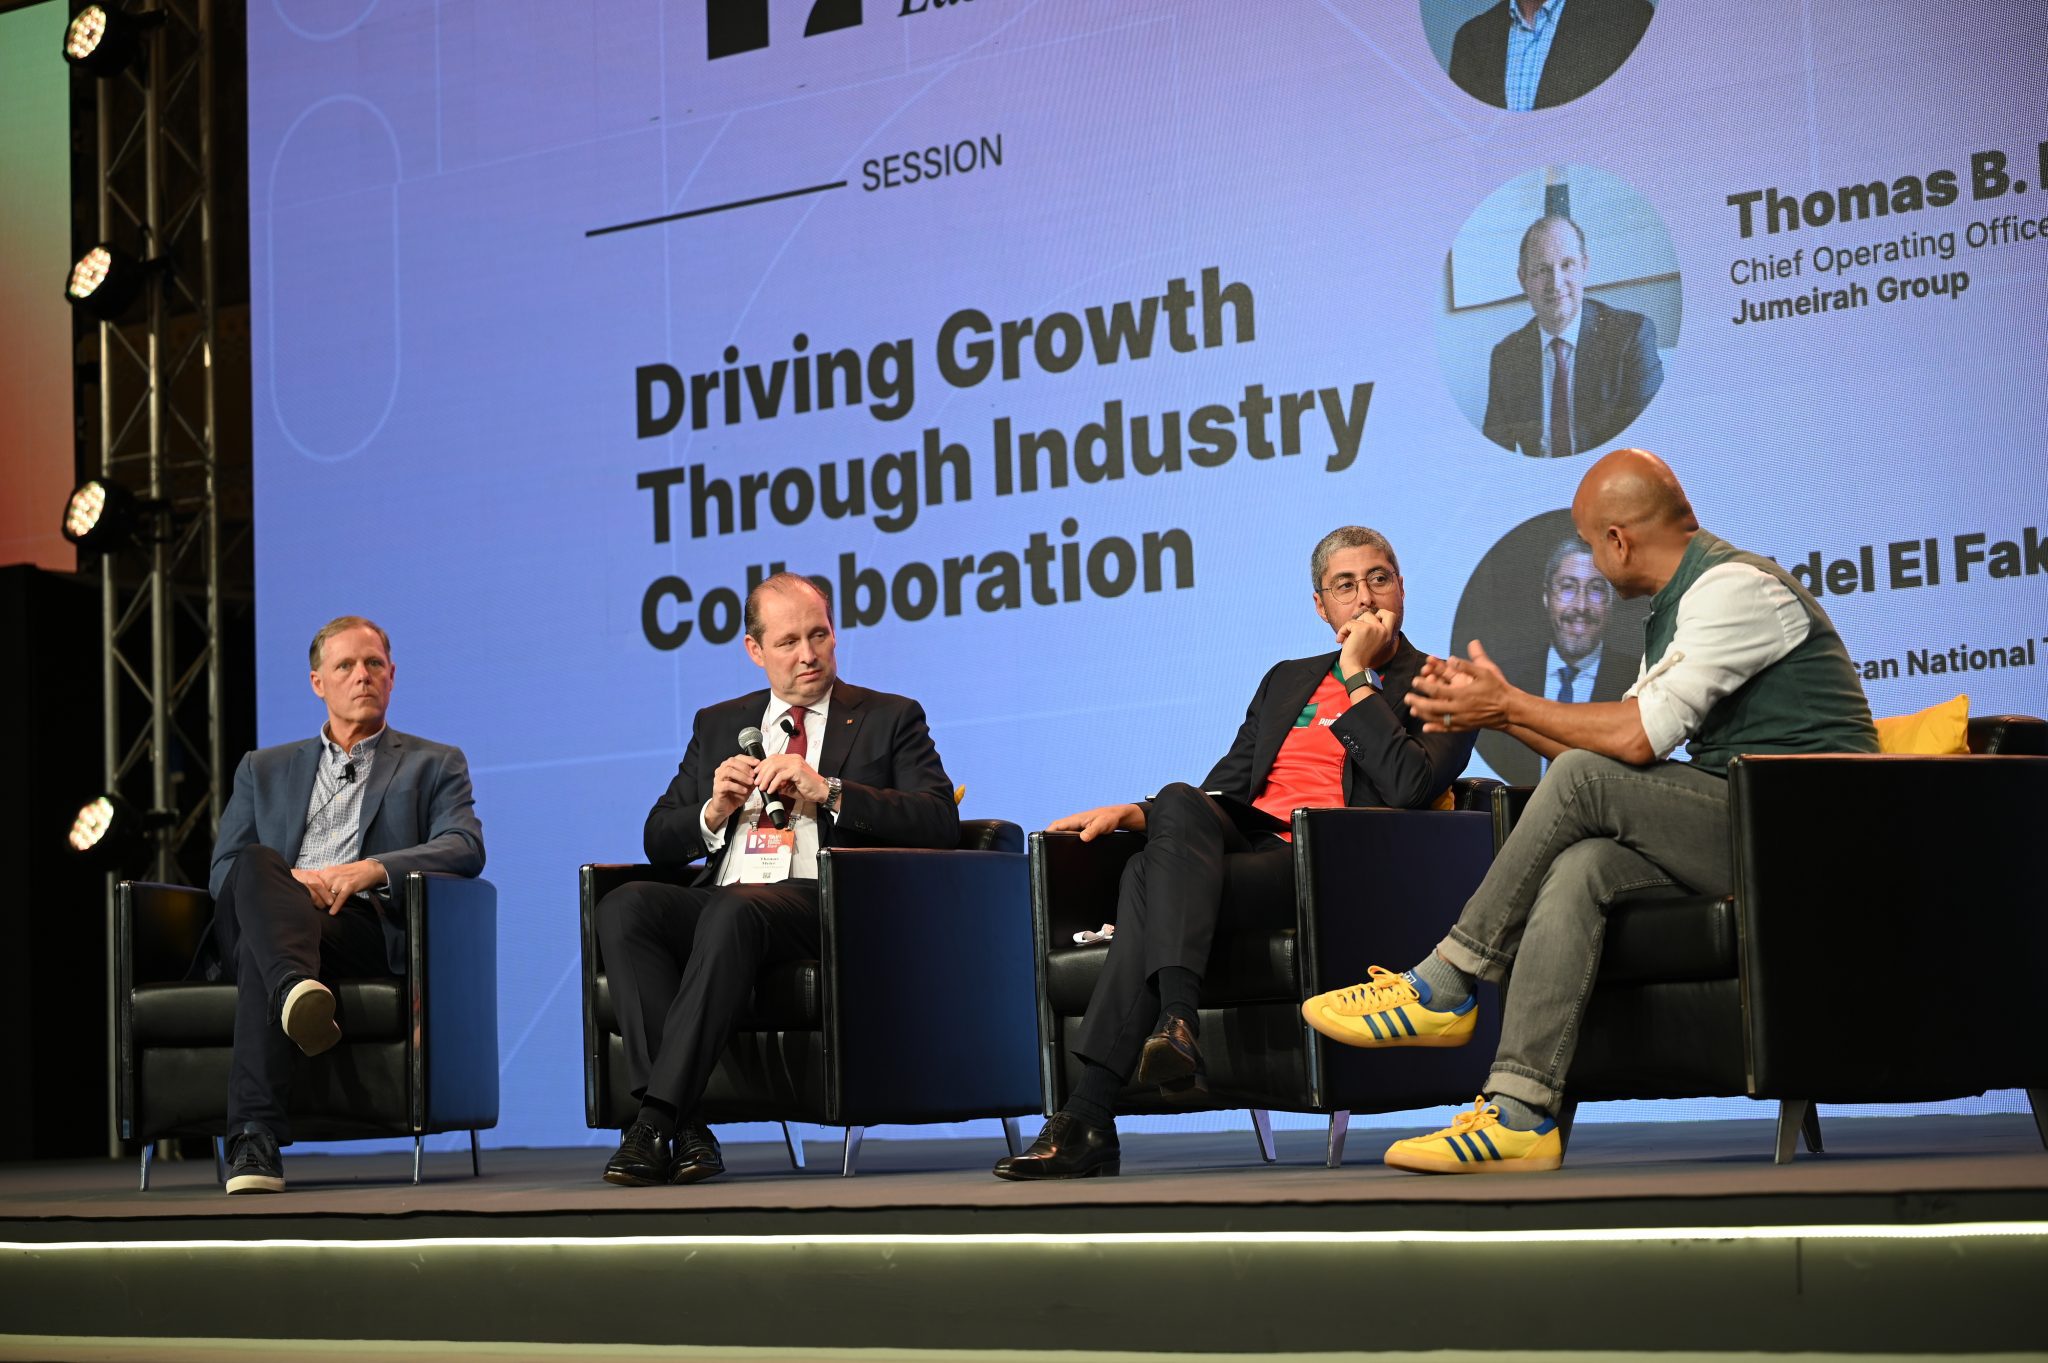 From left: Rob Torres, Expedia Group Media; Thomas Meier, Jumeirah Group; Adel El Fakir, Moroccan National Tourism Office; and Rafat Ali, Skift, speaking at Skift Global Forum East in Dubai on Dec.14. 